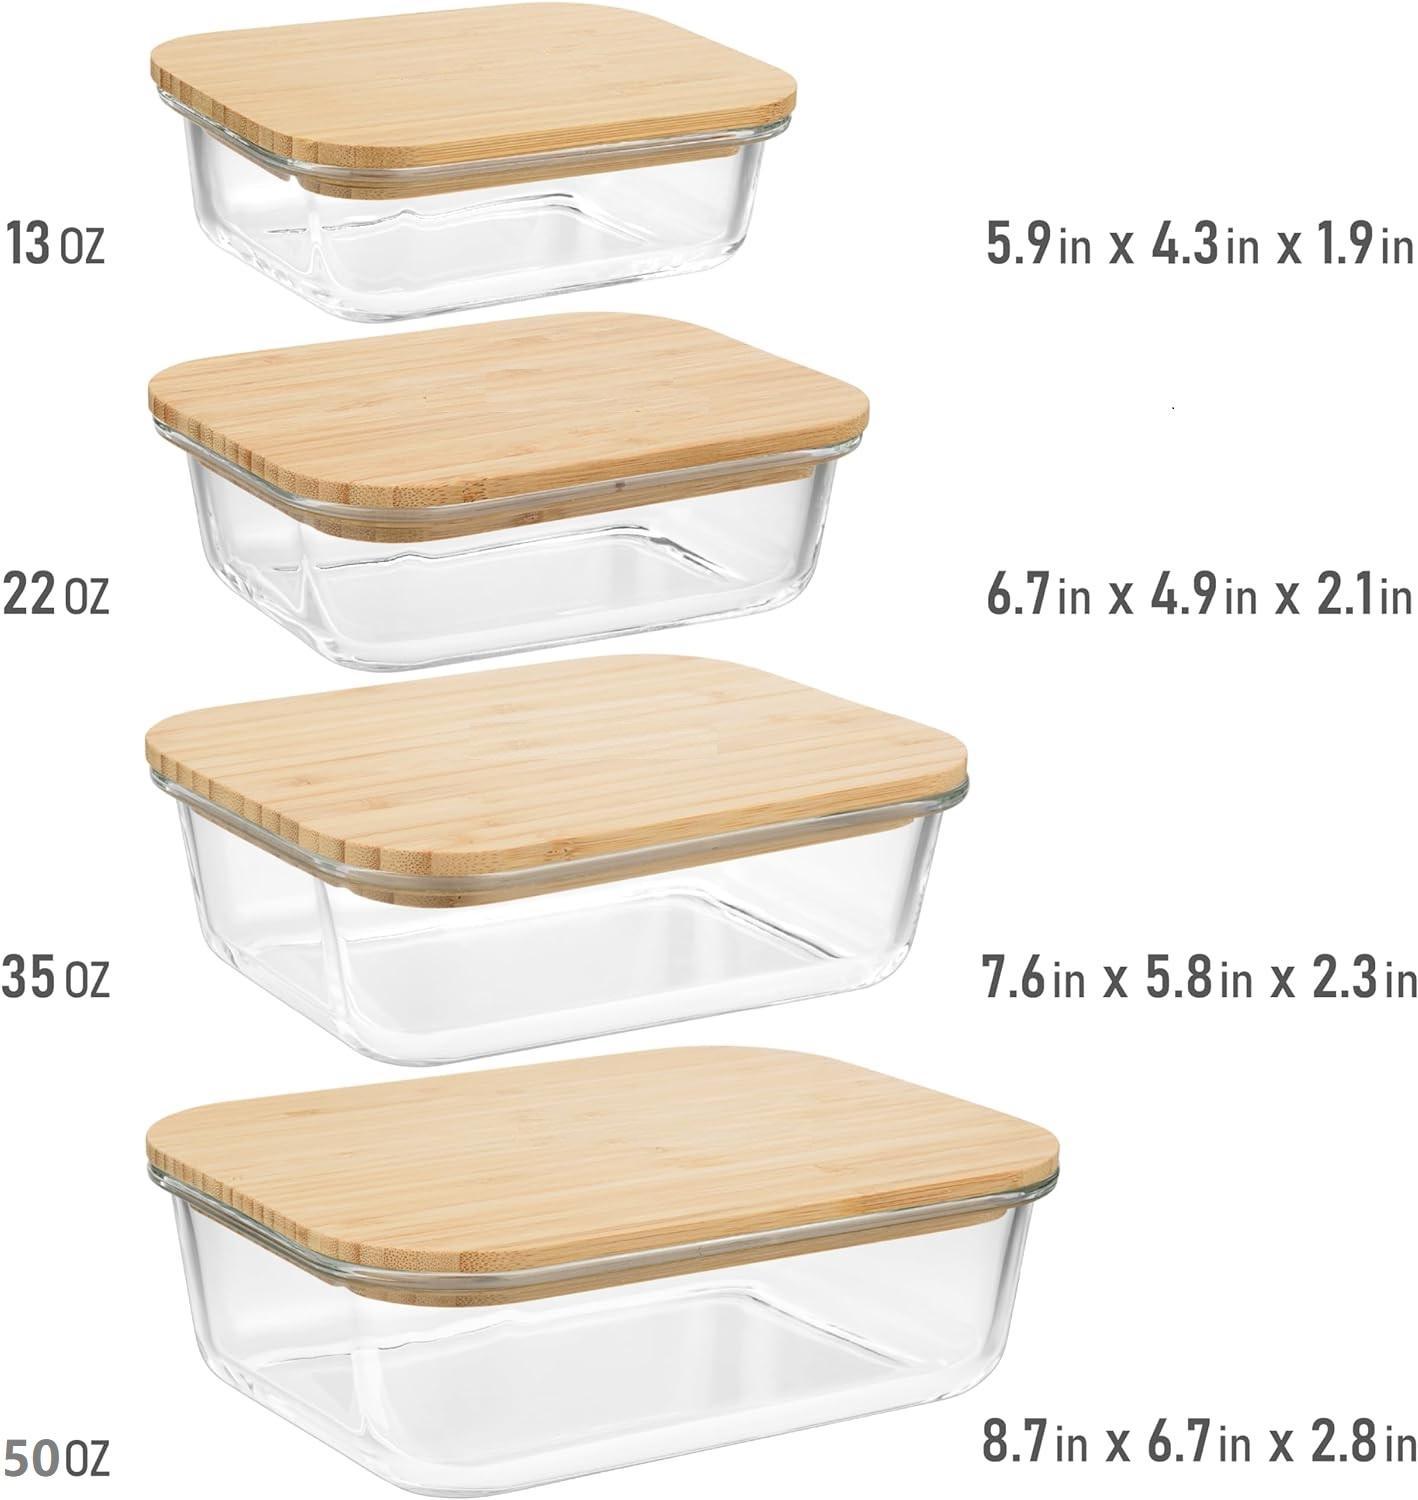 Fresh Guard 4 Pack Glass Food Storage Containers with Bamboo Lids, Glass Meal Prep Containers,Airtight Glass Bento Boxes with Bamboo Lids, Safe for Microwave, Oven, Freezer and Dishwasher, BPA Free